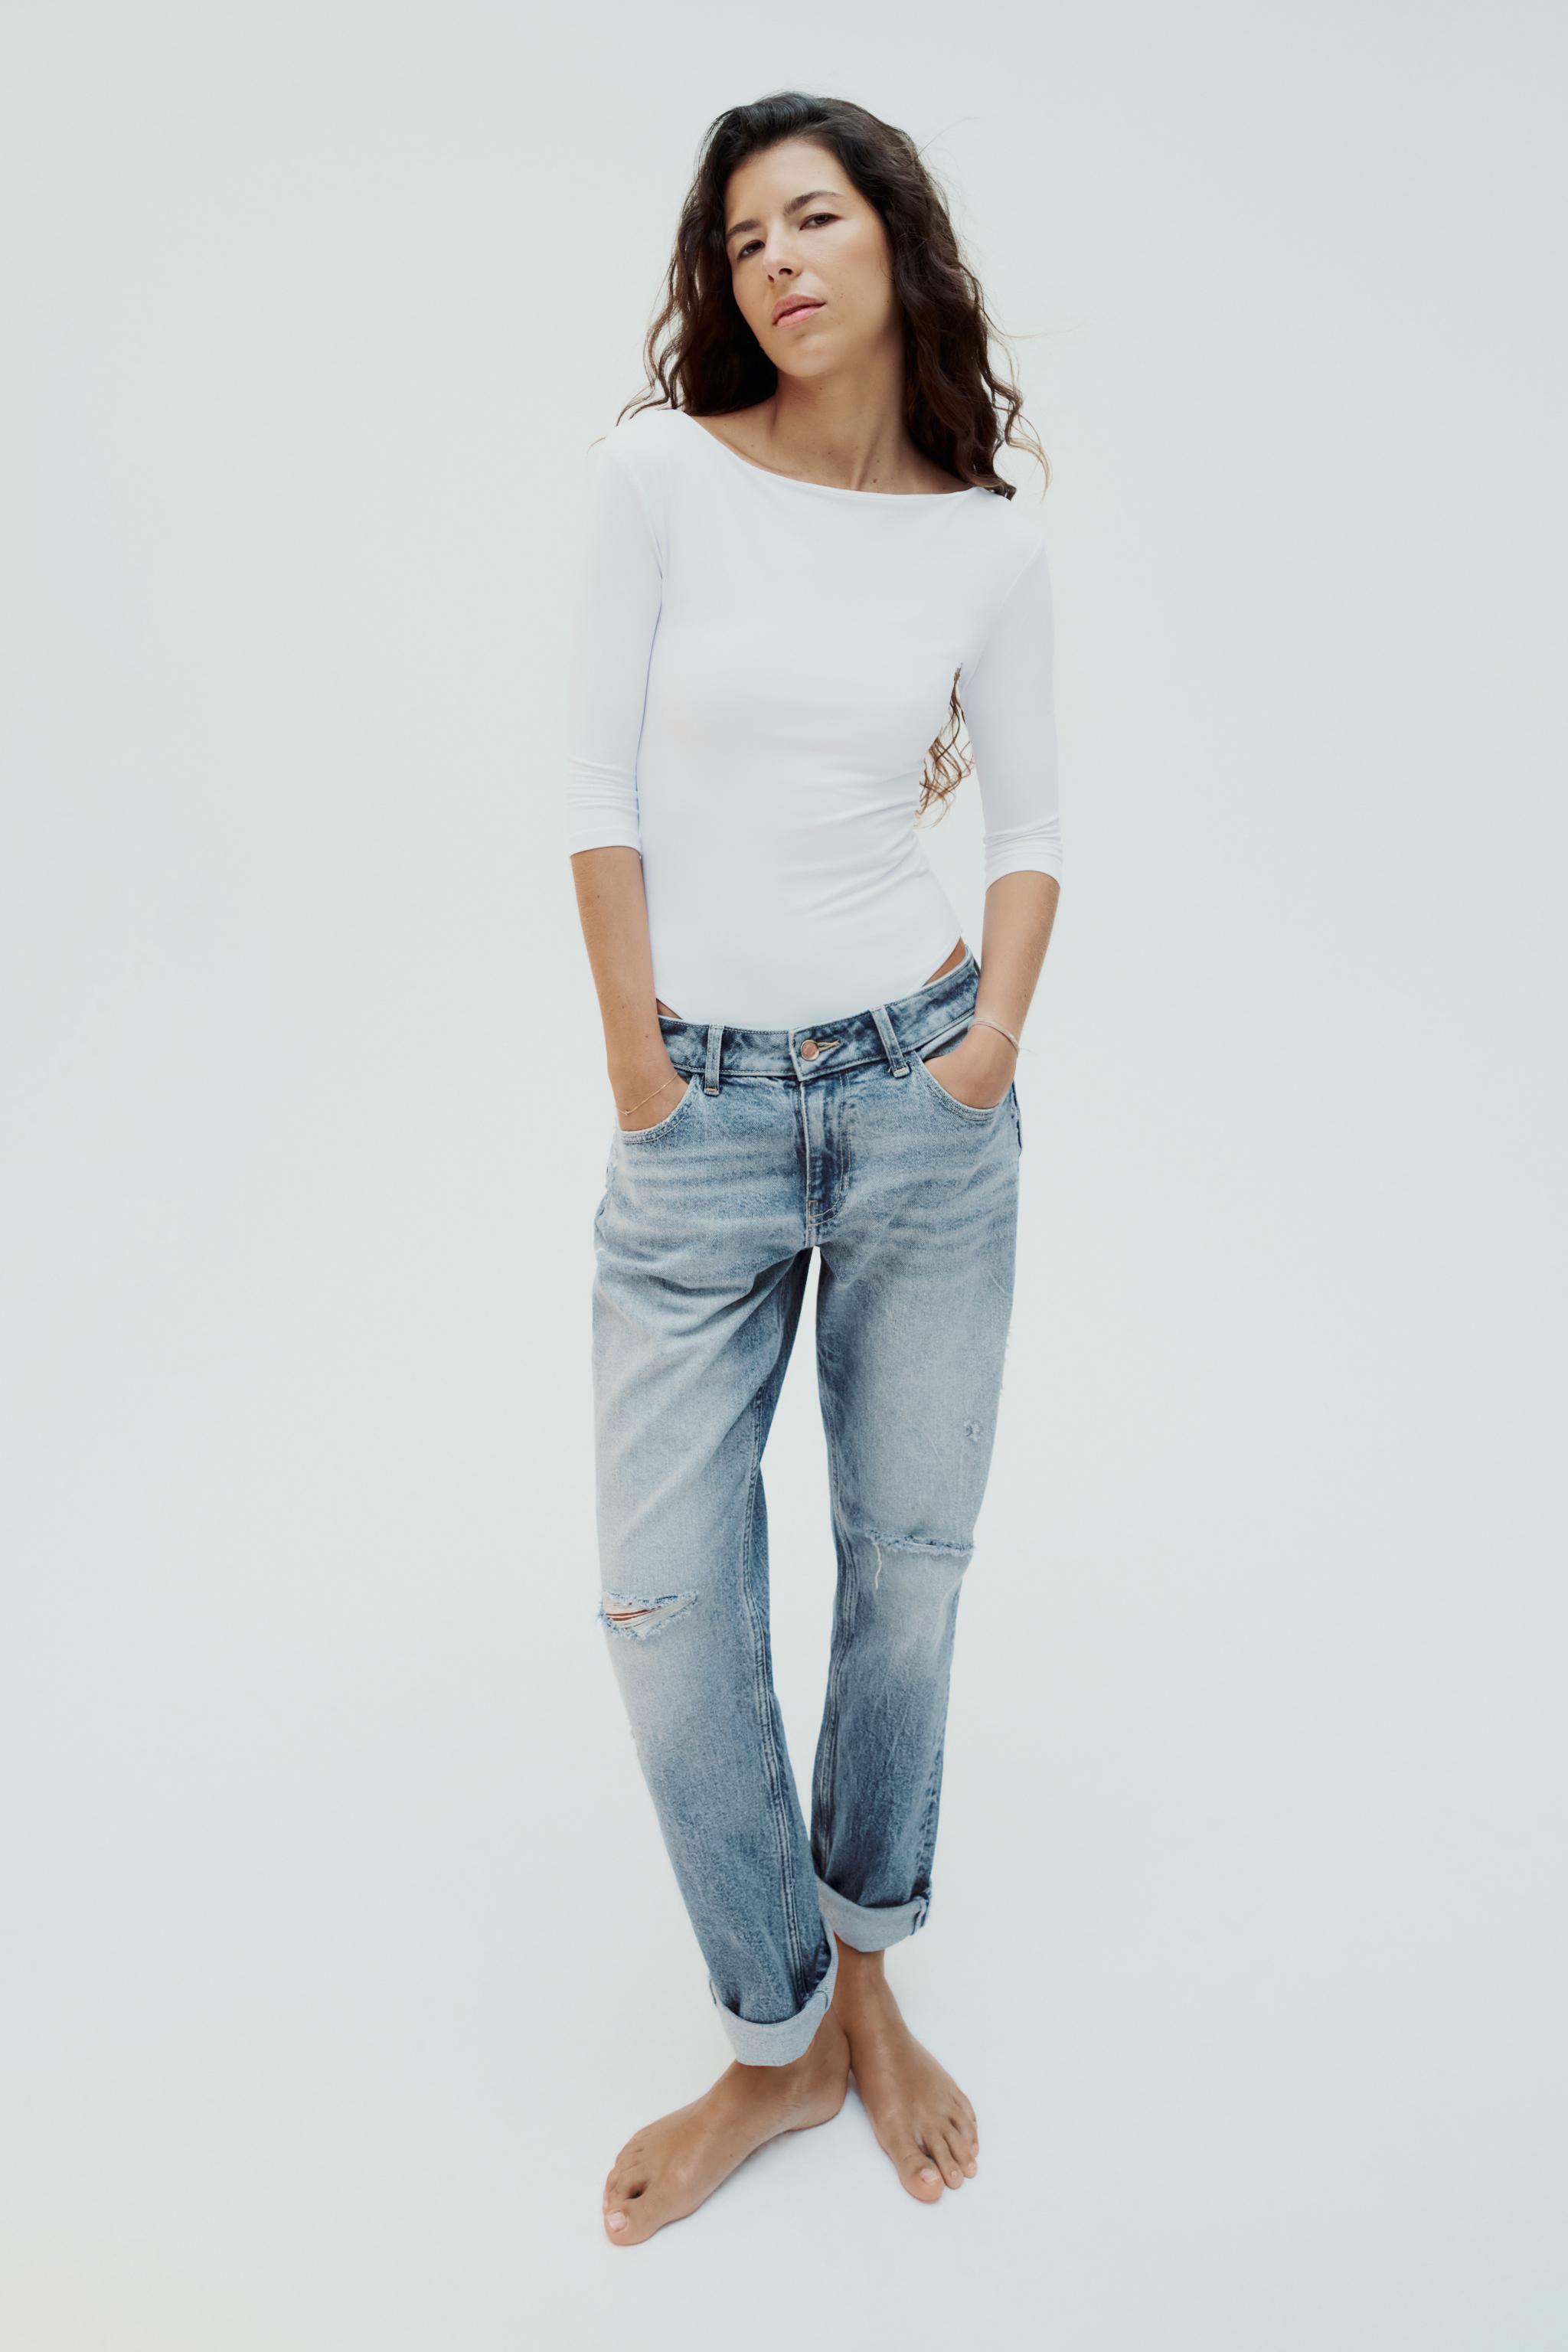 LOW RISE RELAXED FIT Z1975 JEANS - Light blue | ZARA United States